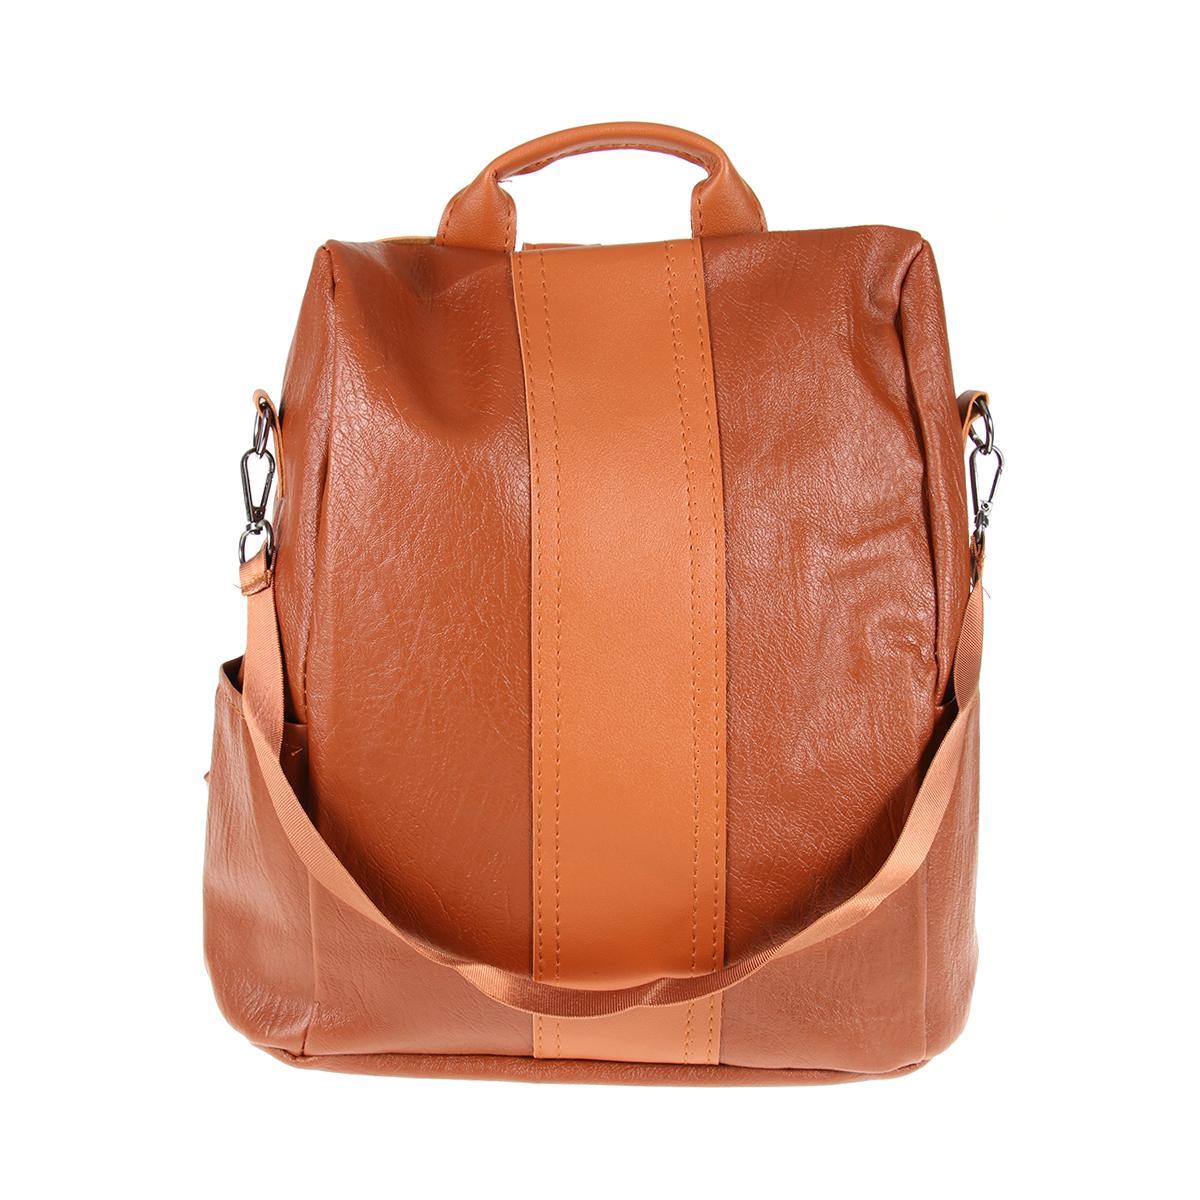 Women Backpack Brown Casual Multi-function Leather Shoulder Bag Large Capacity School Bag with Handle for Women Girls